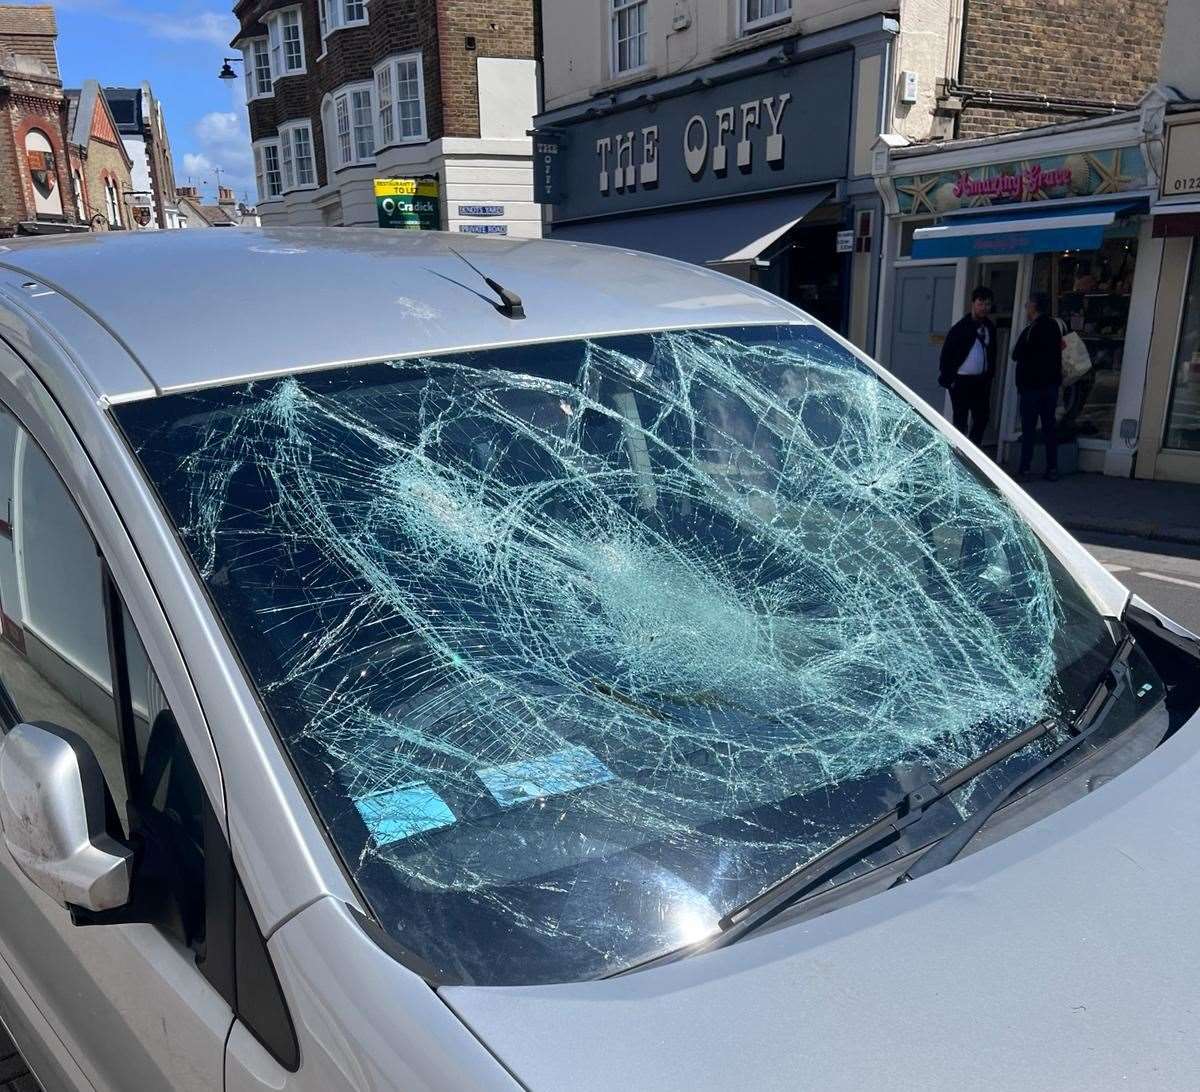 Georgina Jenkins was shocked to discover her car had been vandalised while parked in a disabled bay in Whitstable High Street